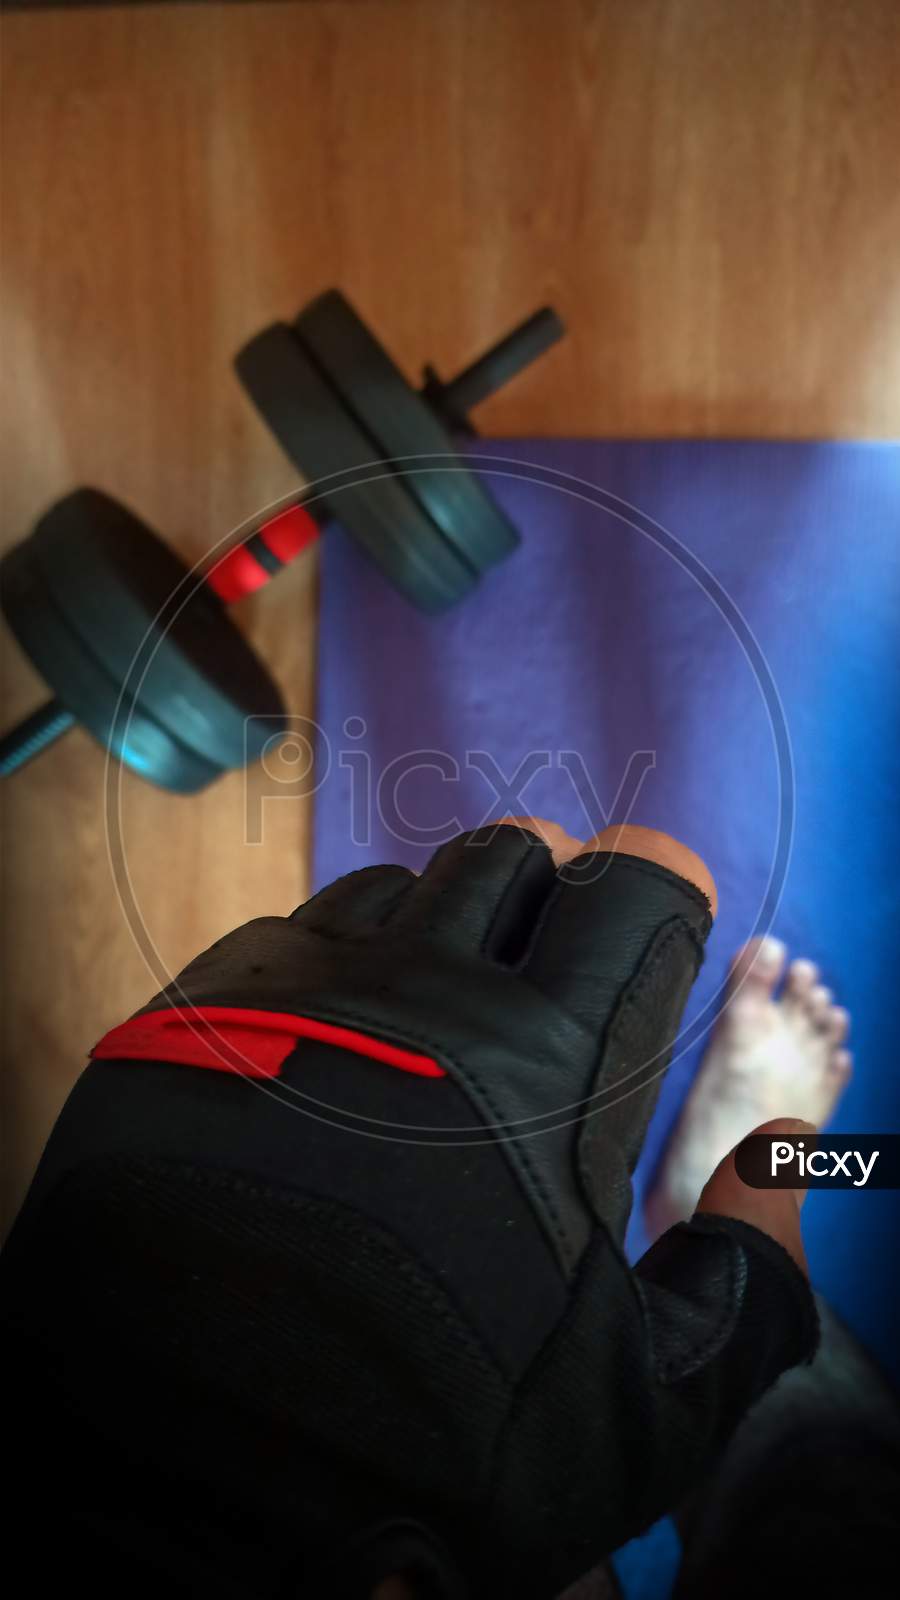 Work Out At Home Concept Showing Top View Of Weight Lifting Hand Glove With A Man Standing On Blue Neoprene Mat Next To A Hand Lift Dumbbell. Sports Concept During Epidemics, Pandemic, New Normal